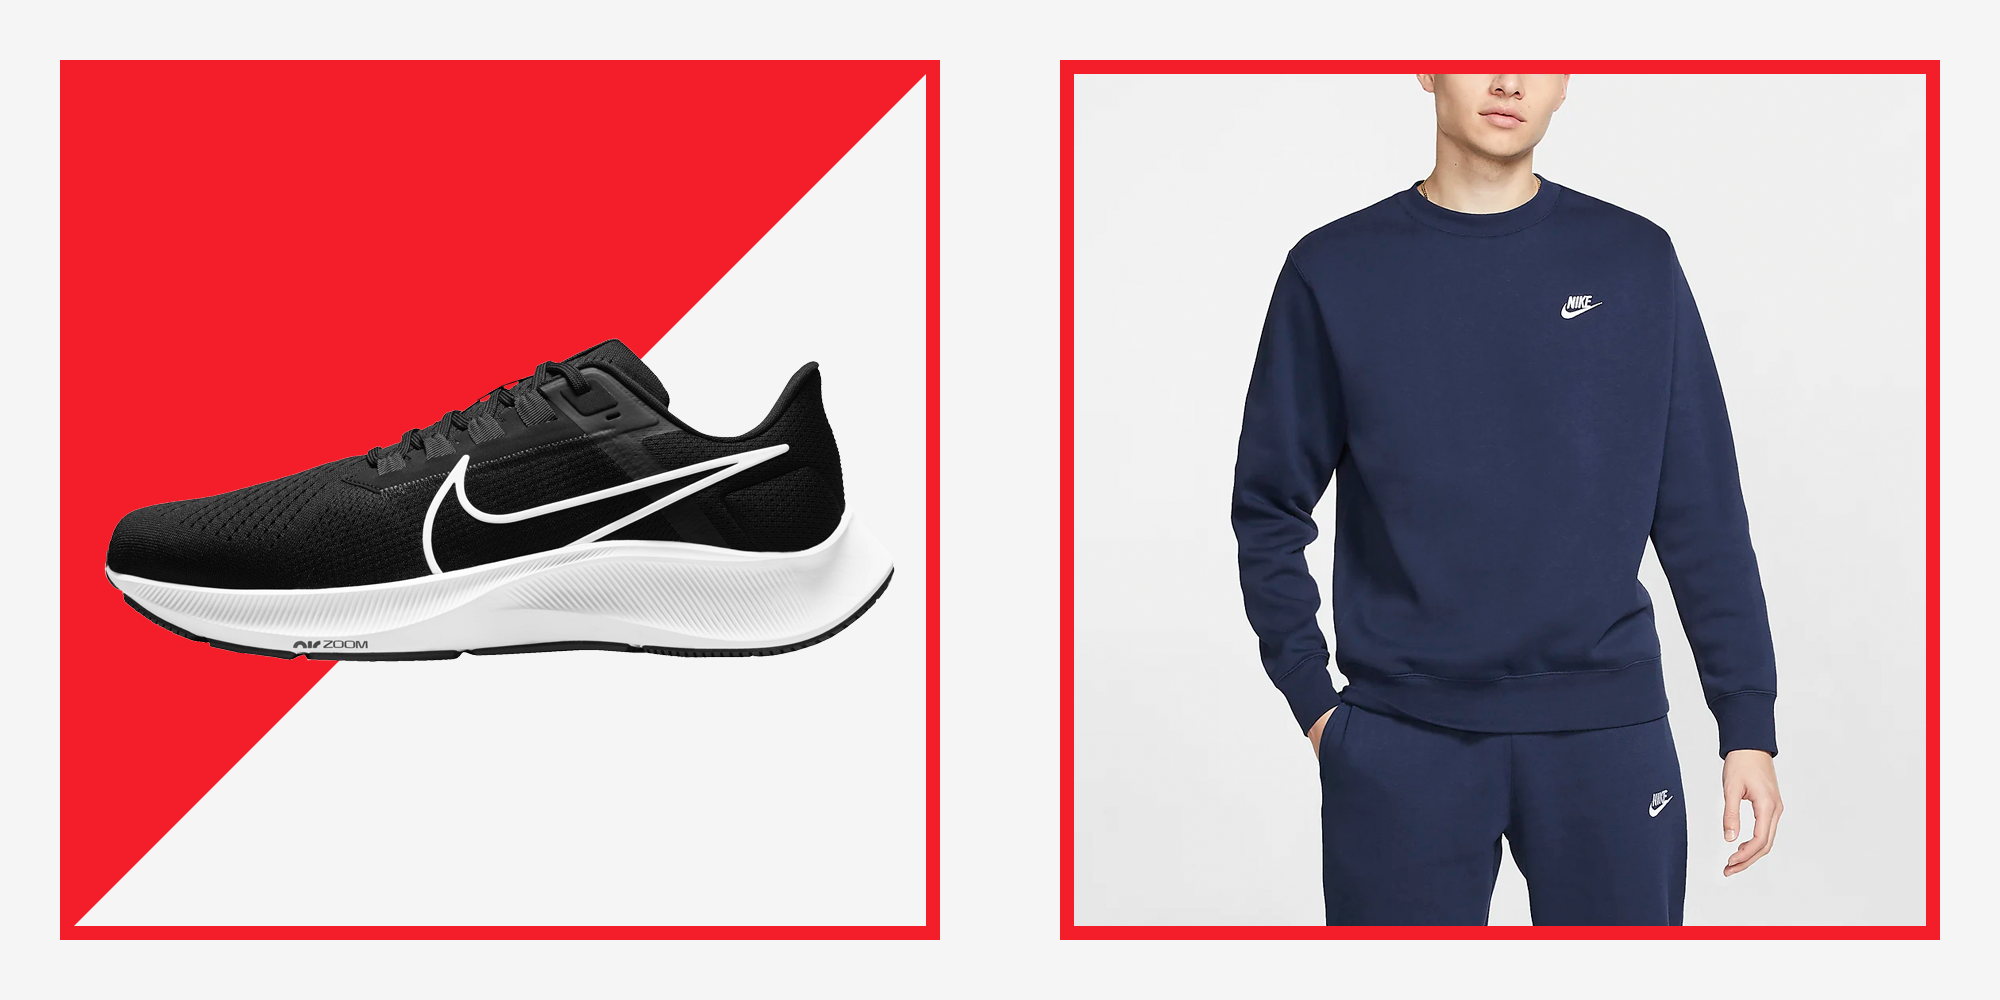 Maligno Interpersonal hospital Nike's 50th Anniversary Sale Has the Best Men's Clothing Deals